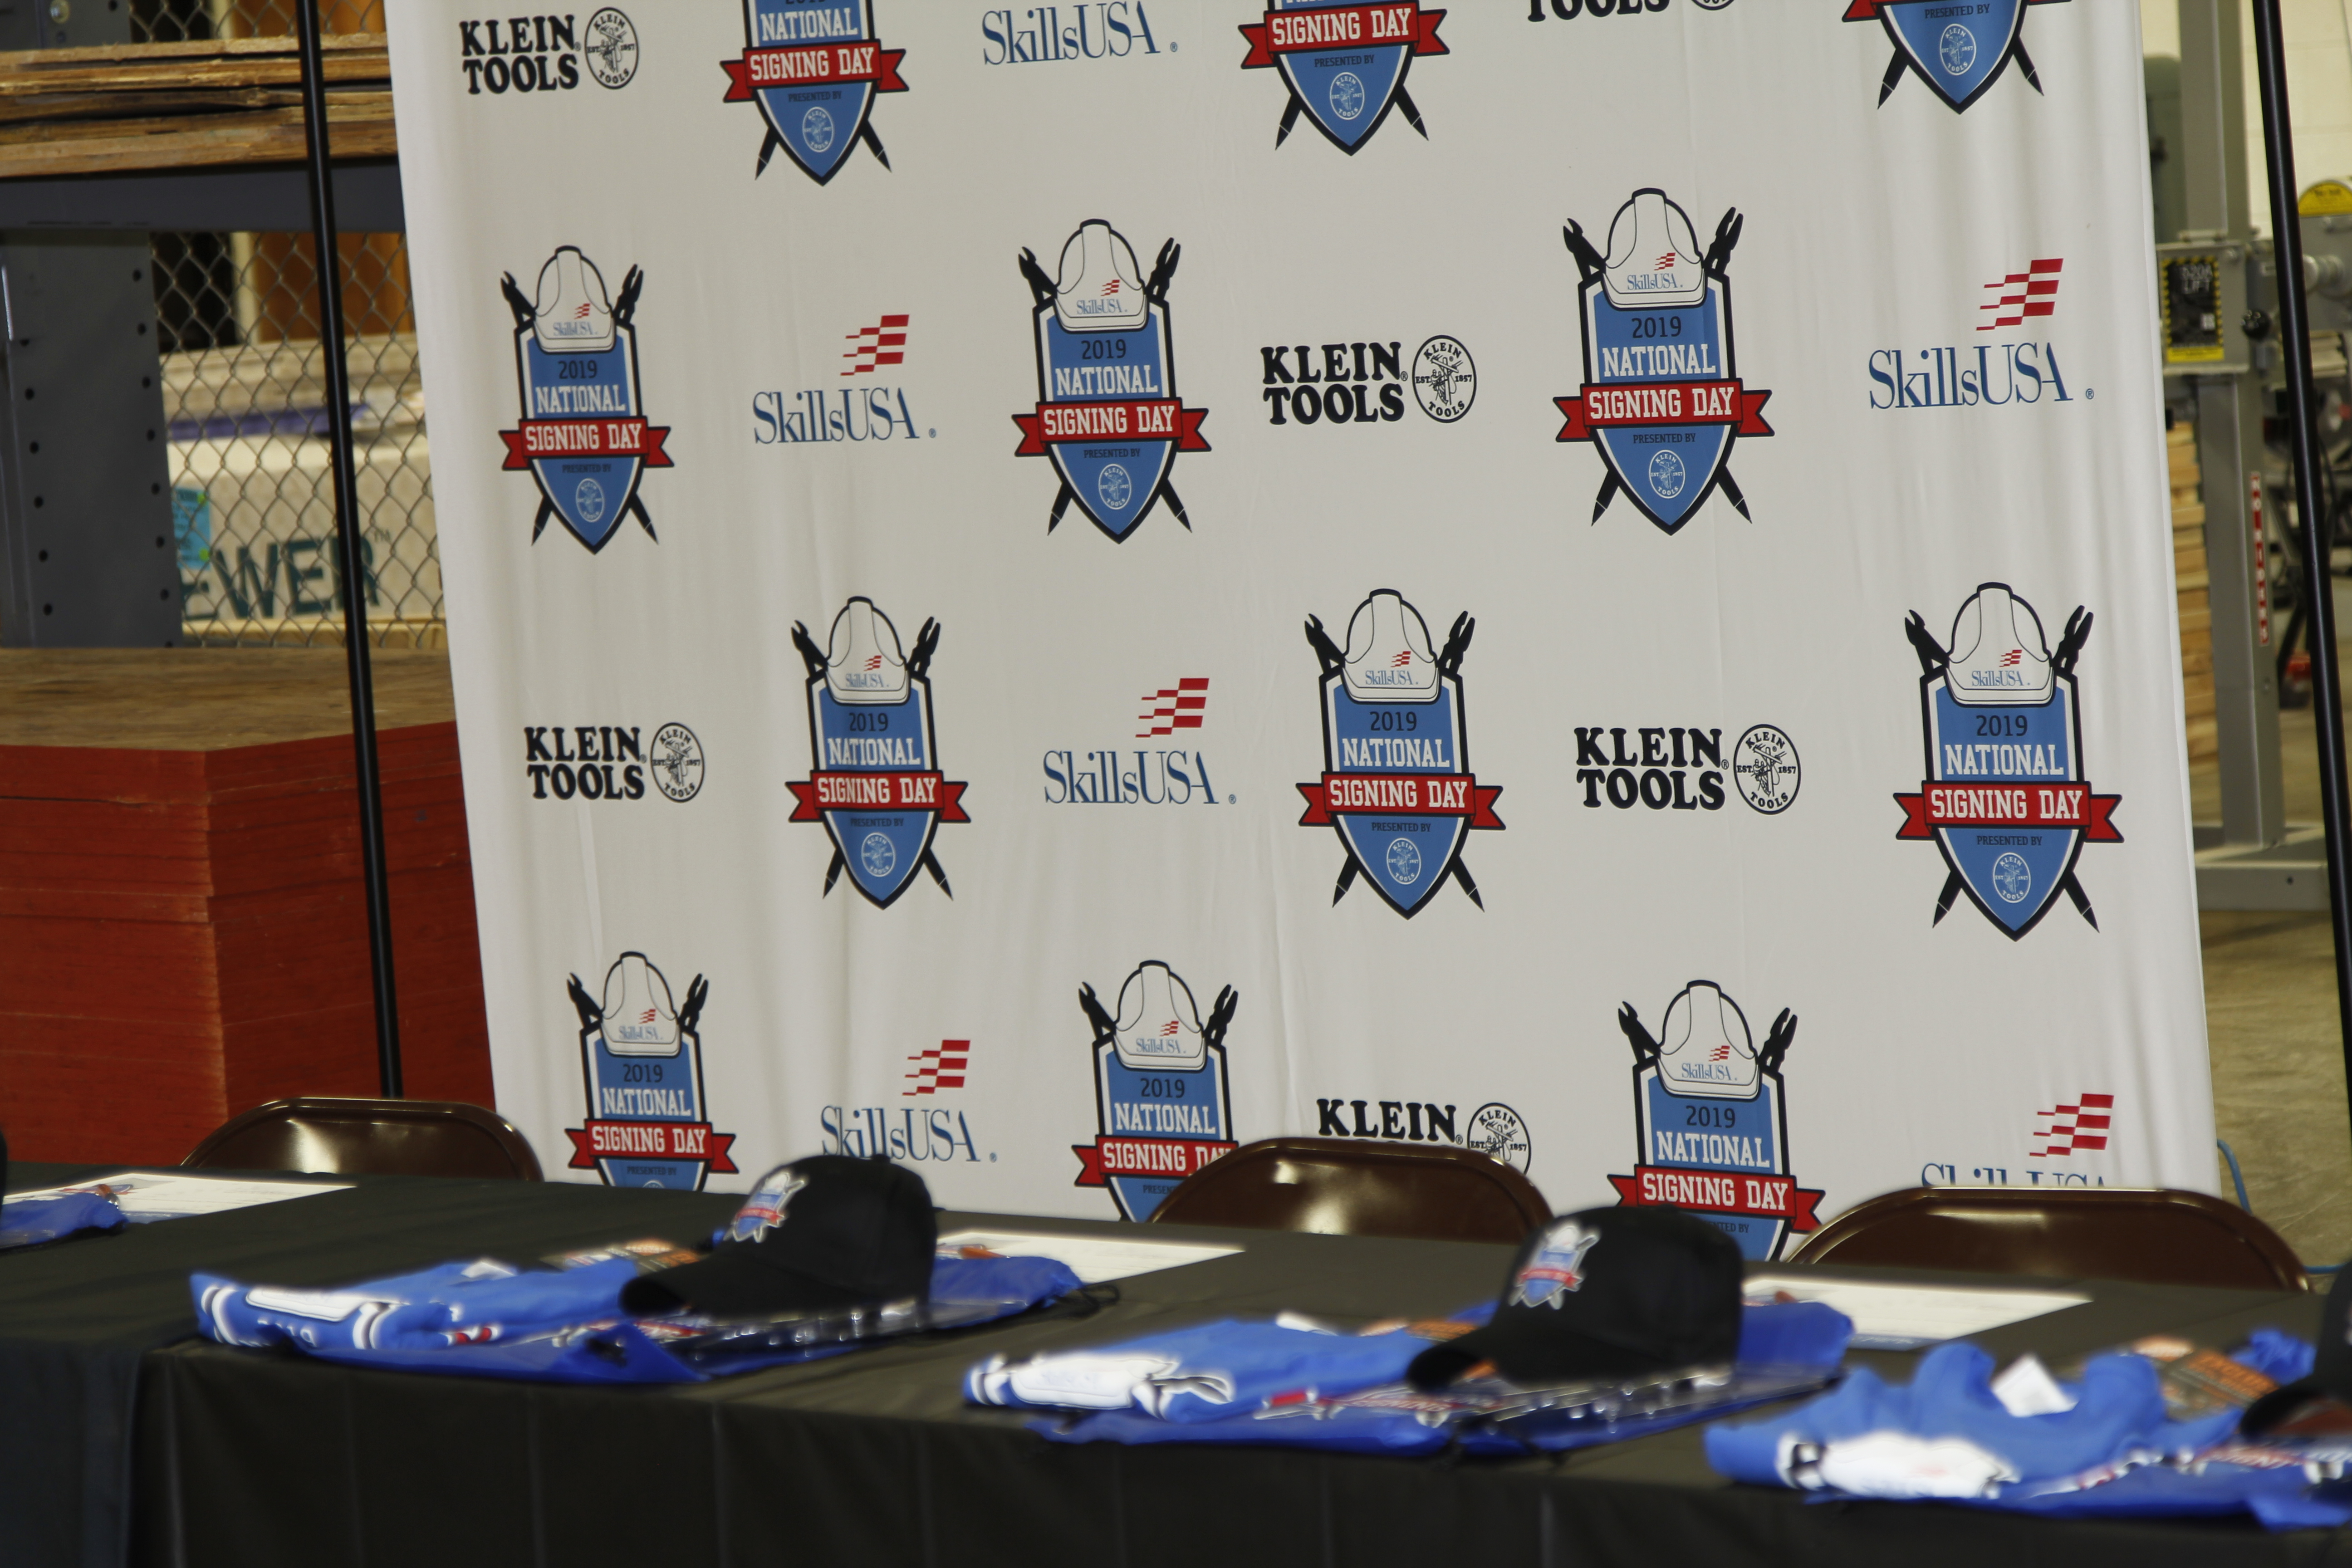 SkillsUSA National Signing Day, Presented by Klein Tools - NYX Awards Winner 